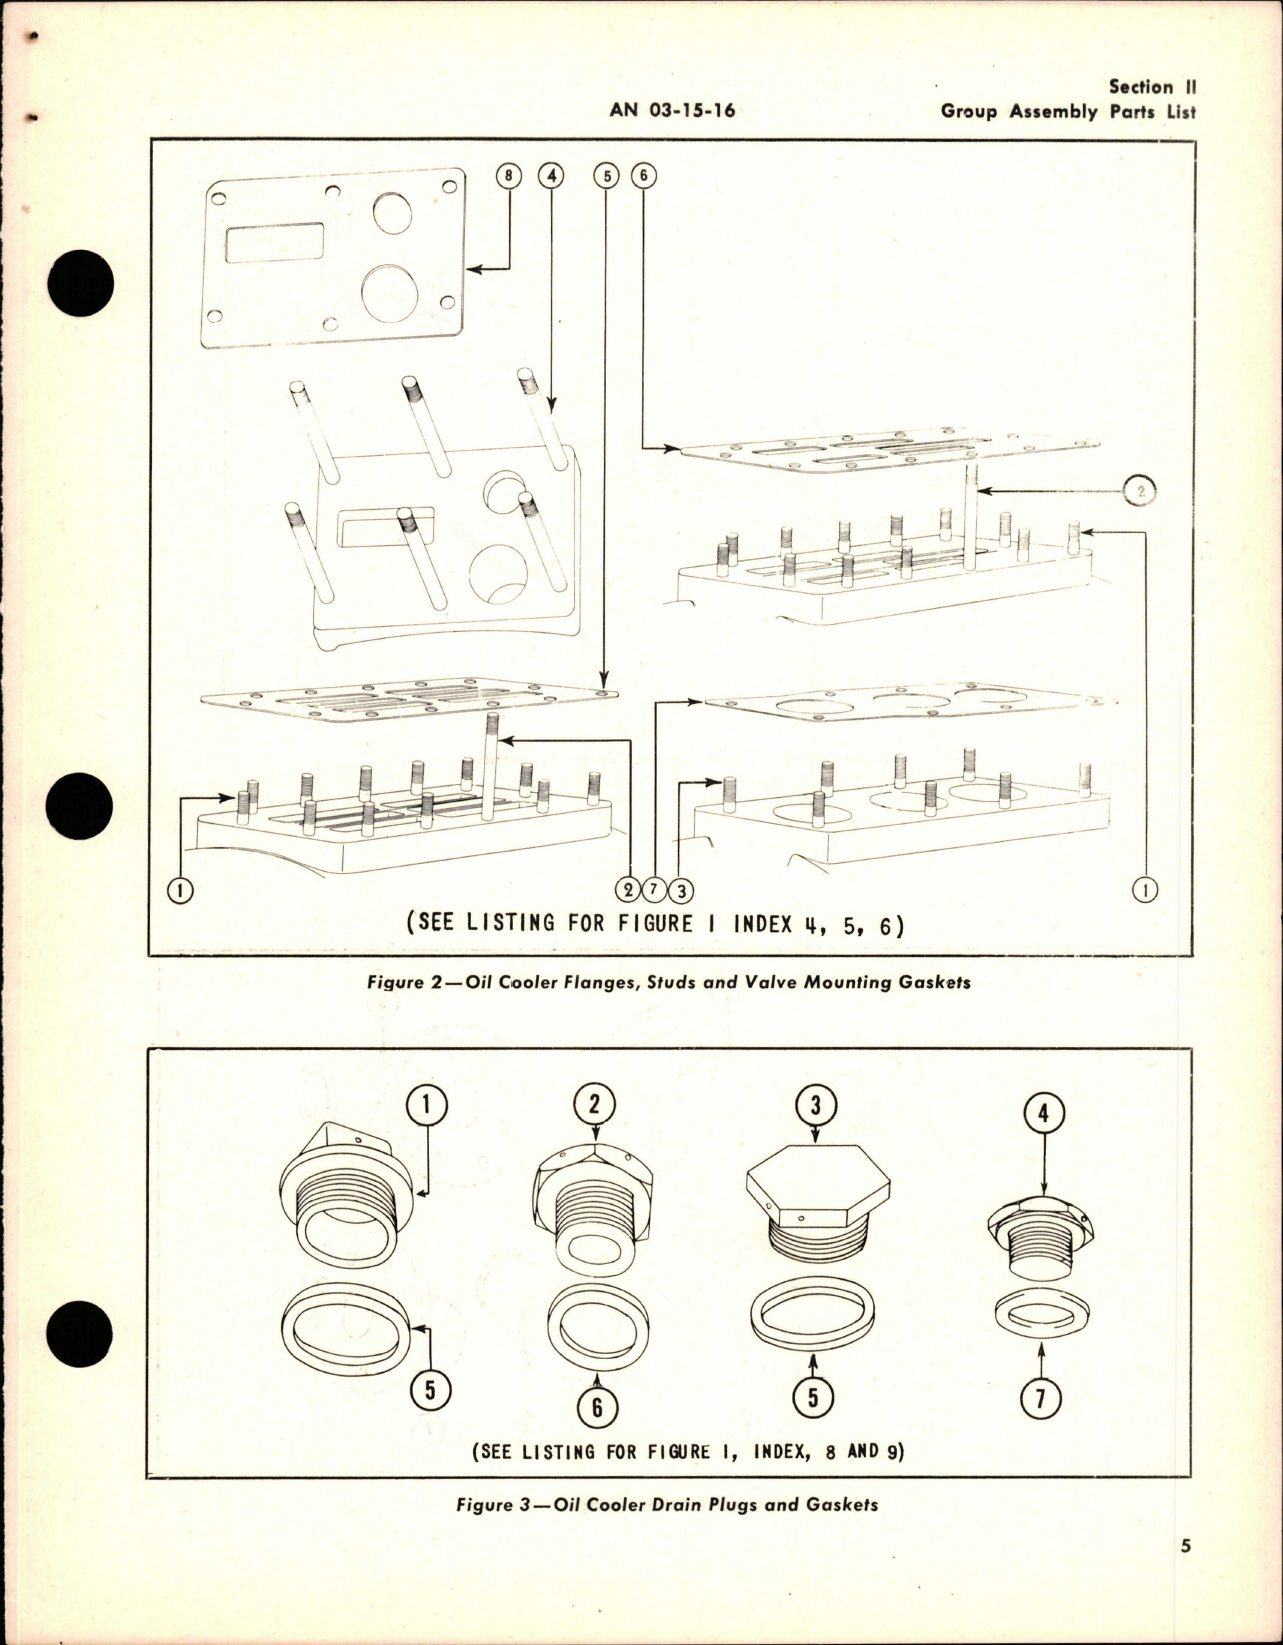 Sample page 9 from AirCorps Library document: Parts Catalog for Oil Coolers and Control Valves